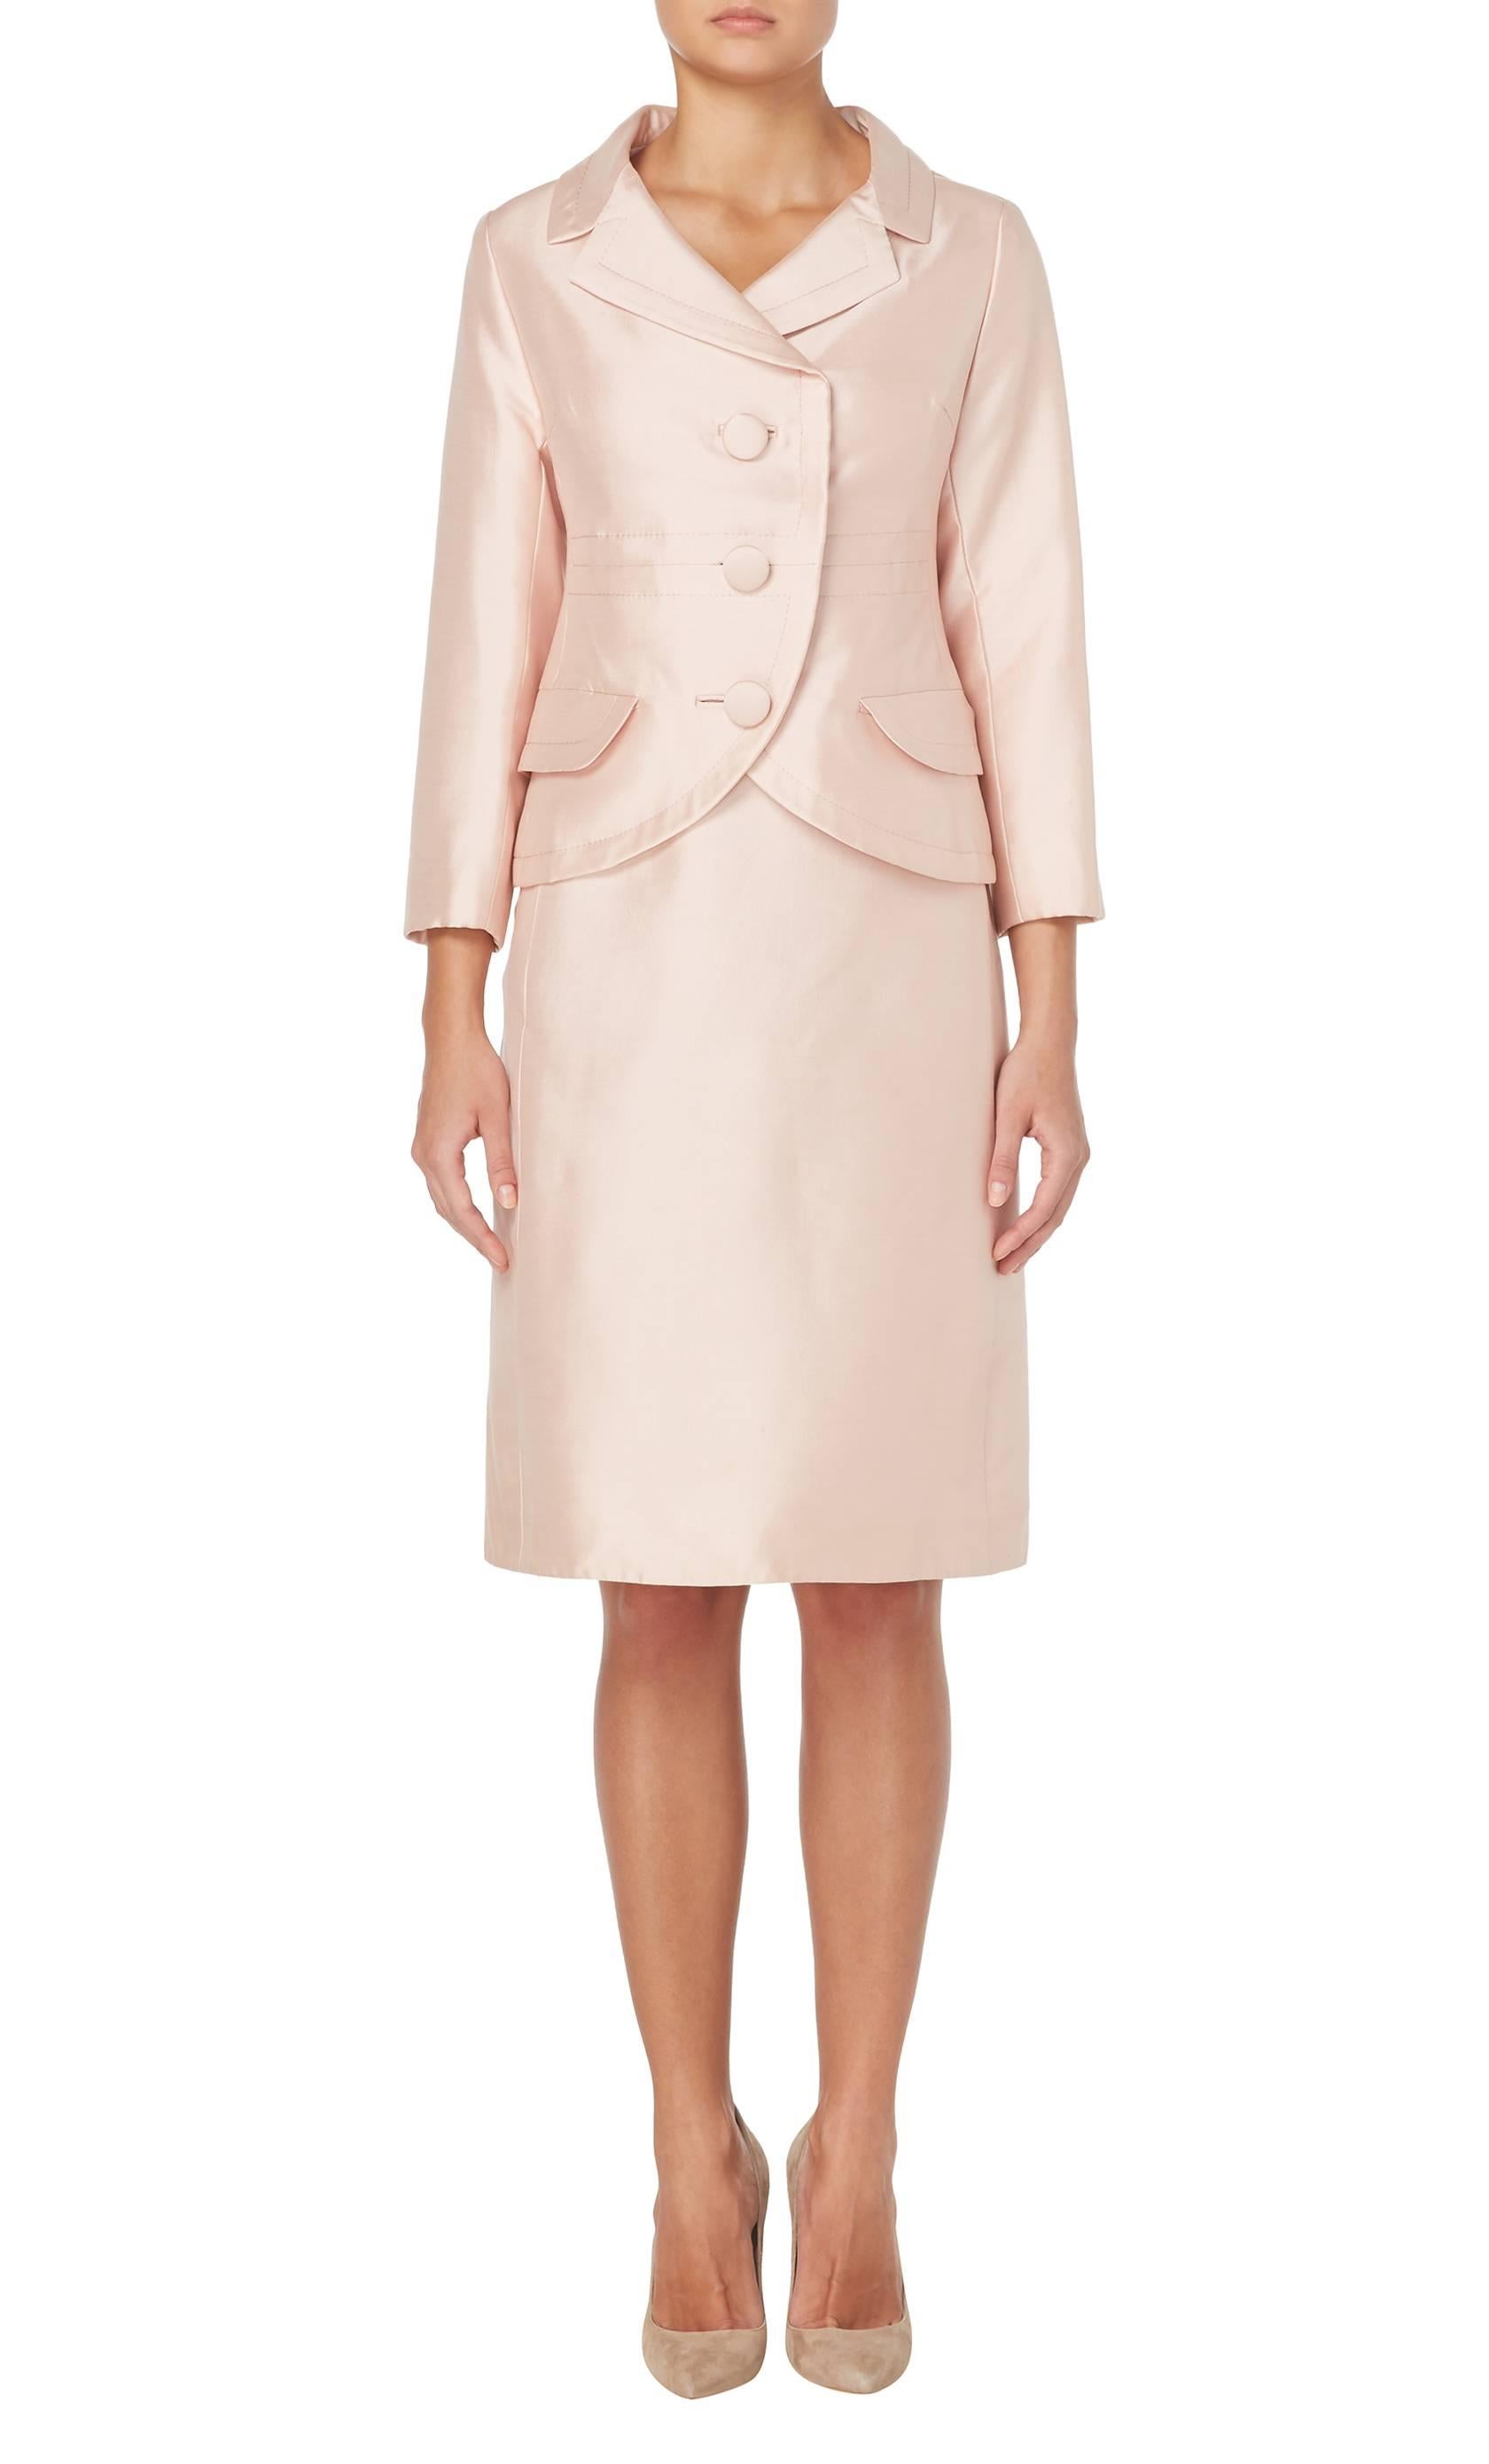 This Christian Dior skirt suit is ideal for weddings and summer events. Constructed in pale pink silk, the jacket features a flattering wide collar, bracelet length sleeves and decorative pocket detail on the hip, while the skirt has a slim fit and